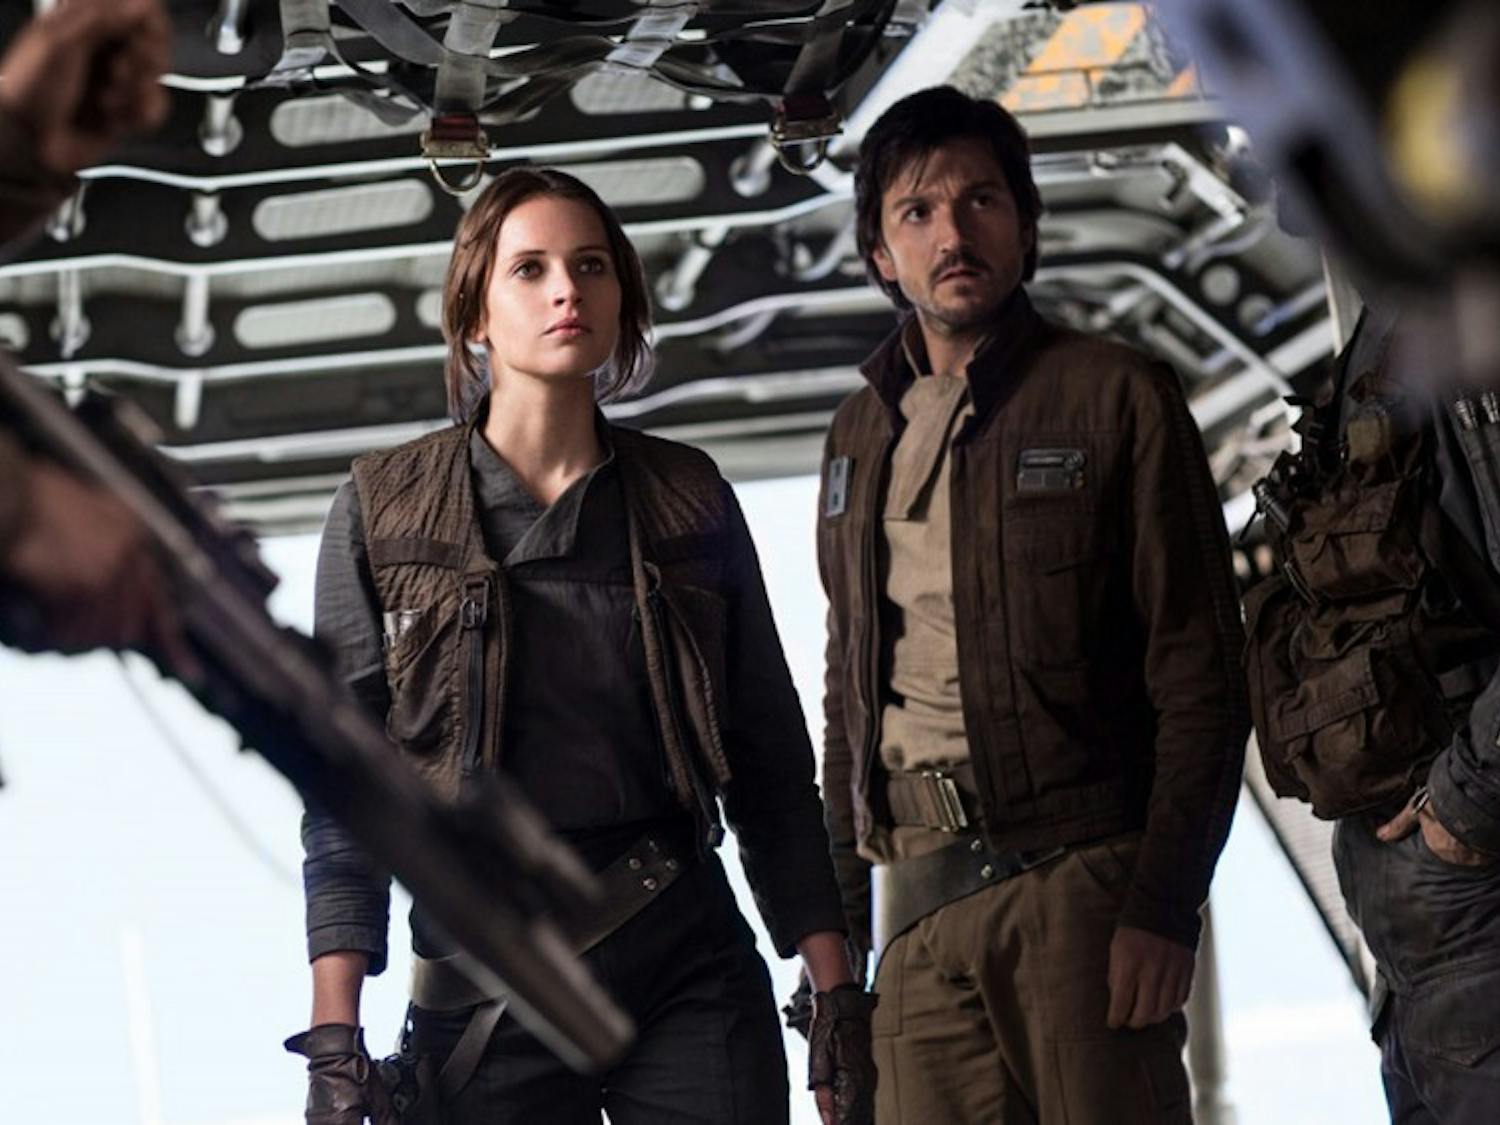 Felicity Jones as Jyn Erso and Diego Luna as Cassian Andor in the film 